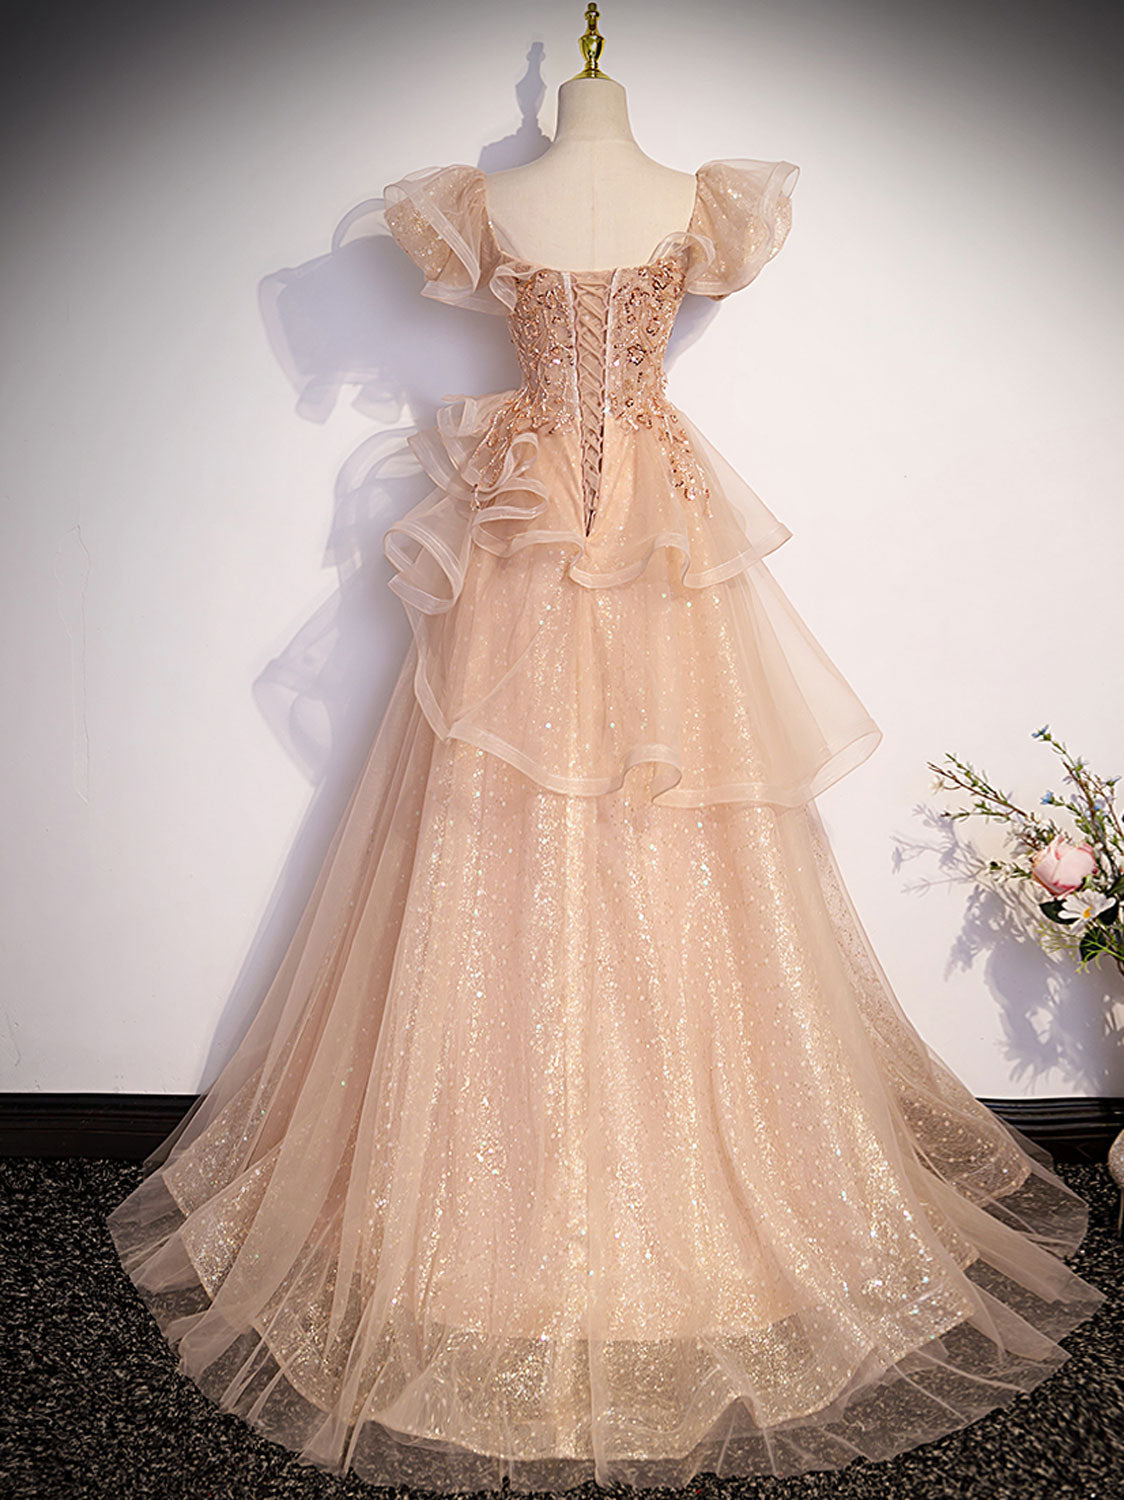 Asymmetrical Queen Anne Neck Champagne Lace Prom Dress - DollyGown